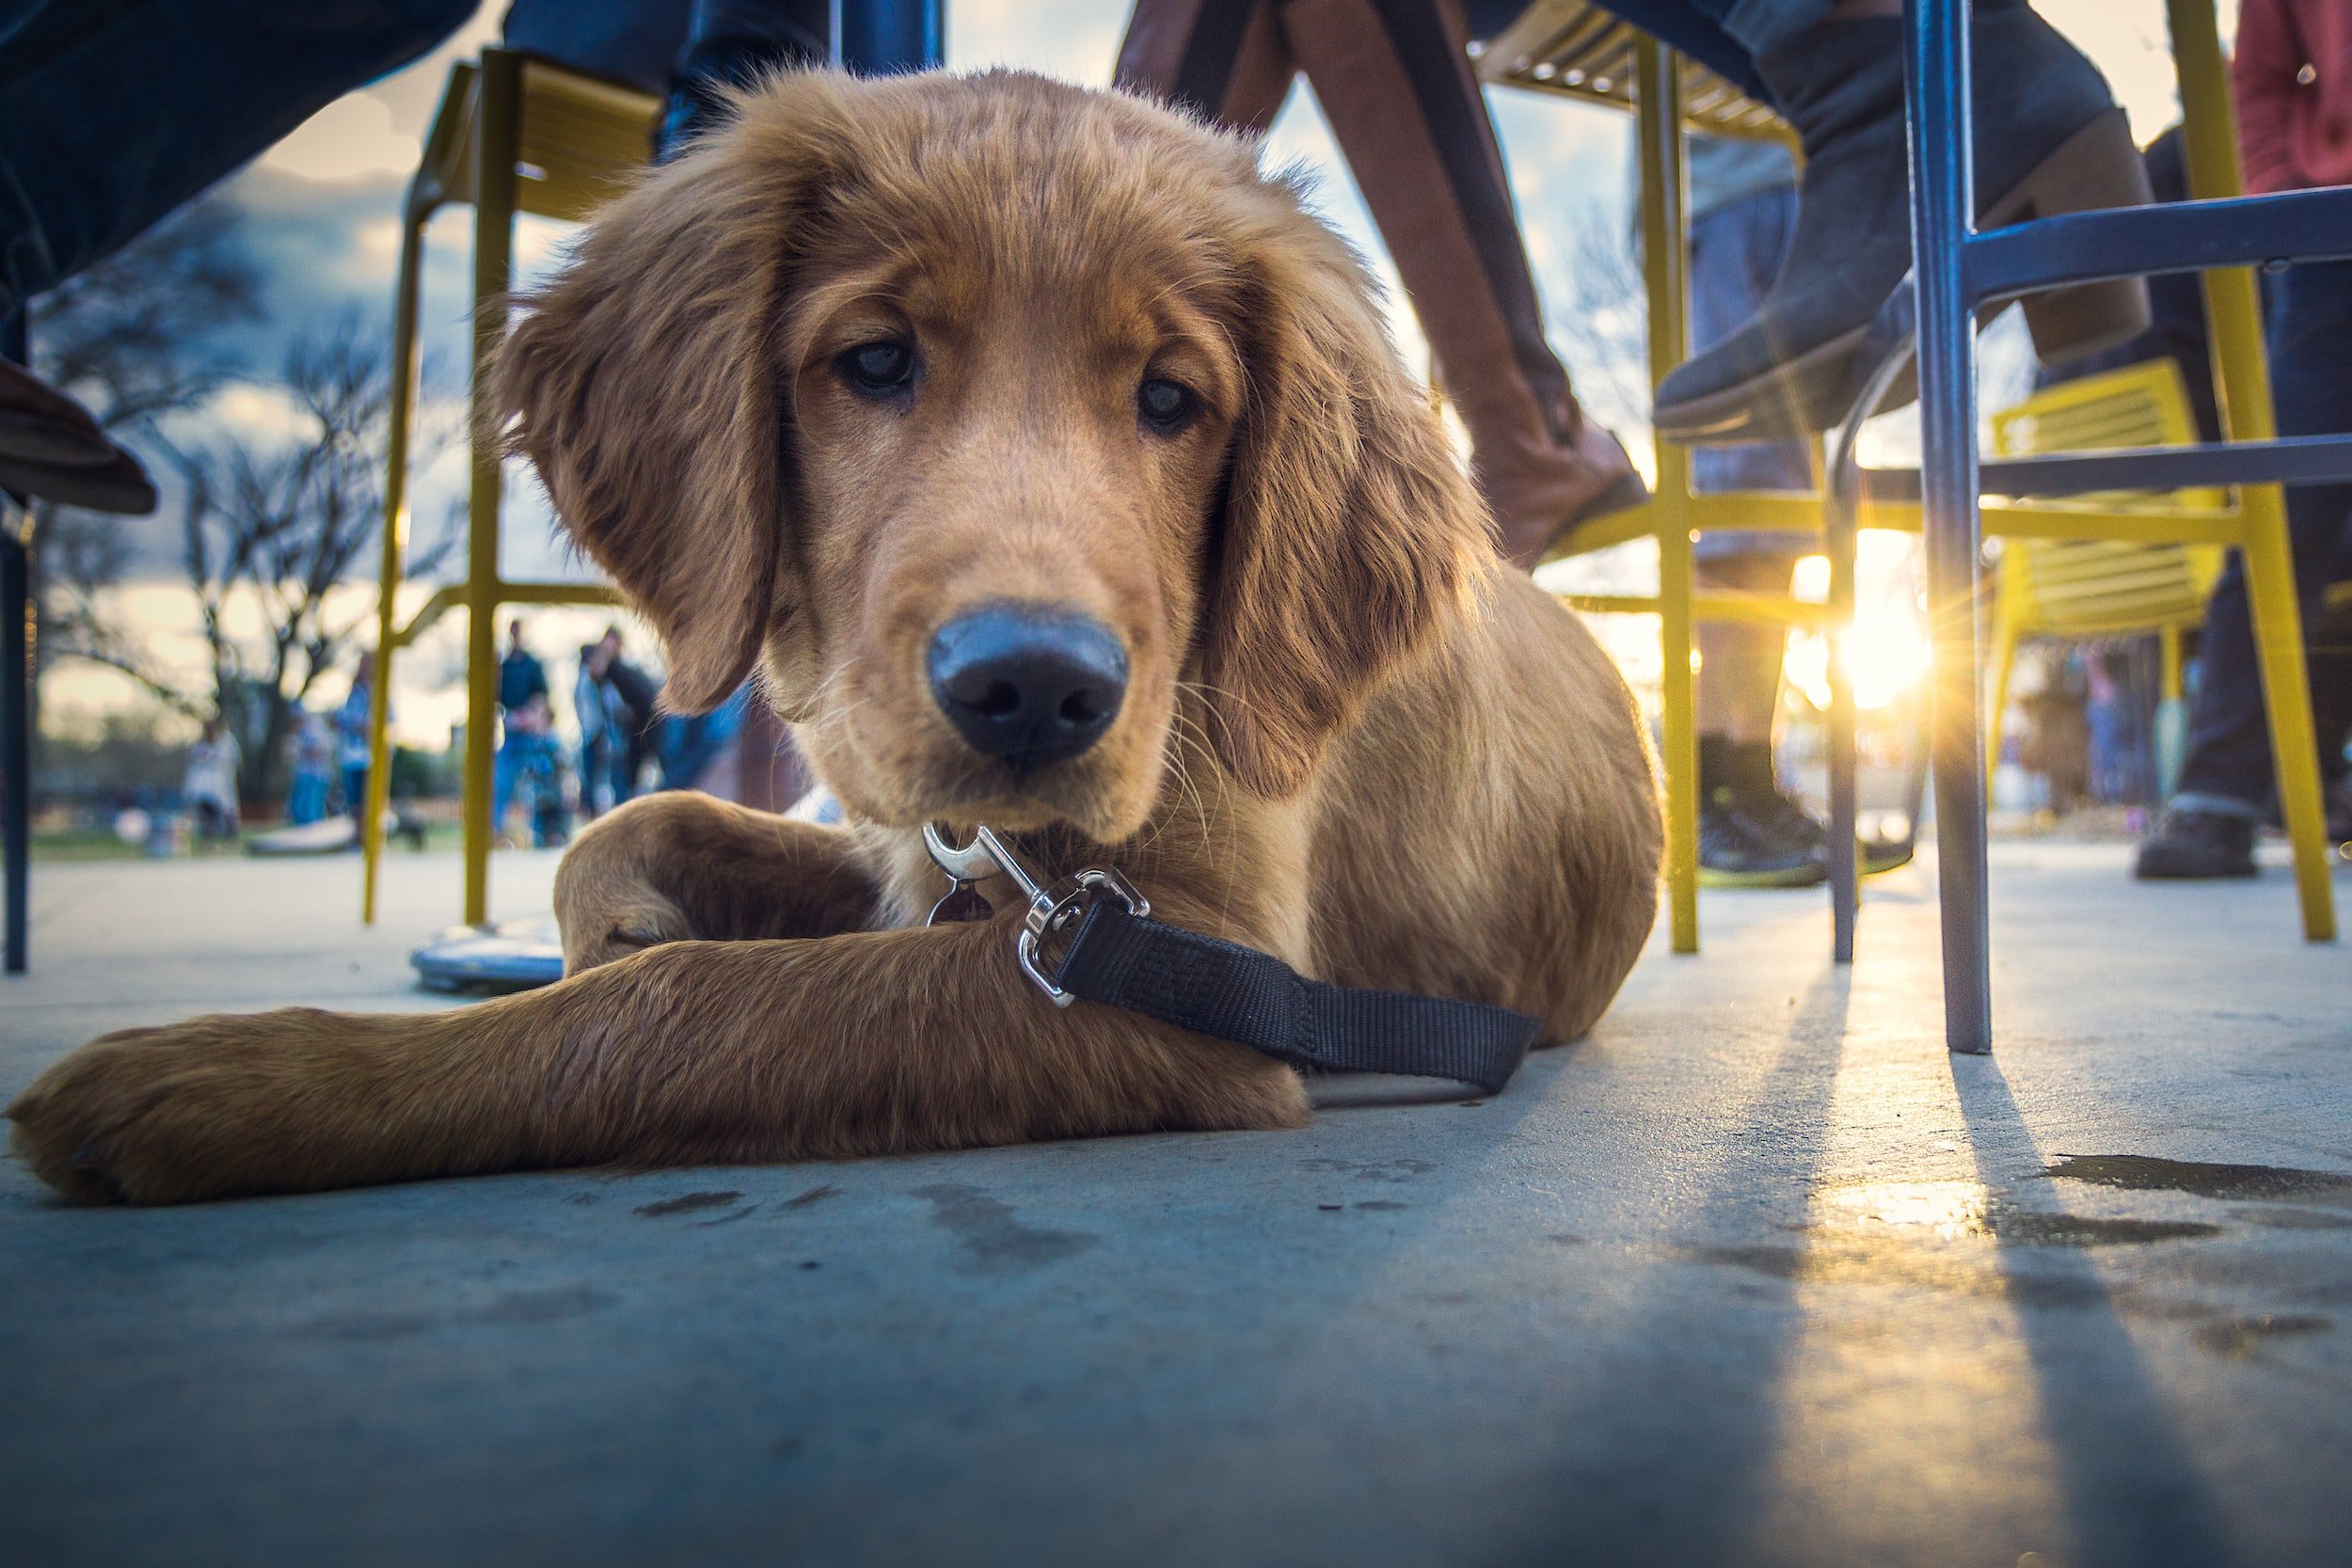 Dog laying under table